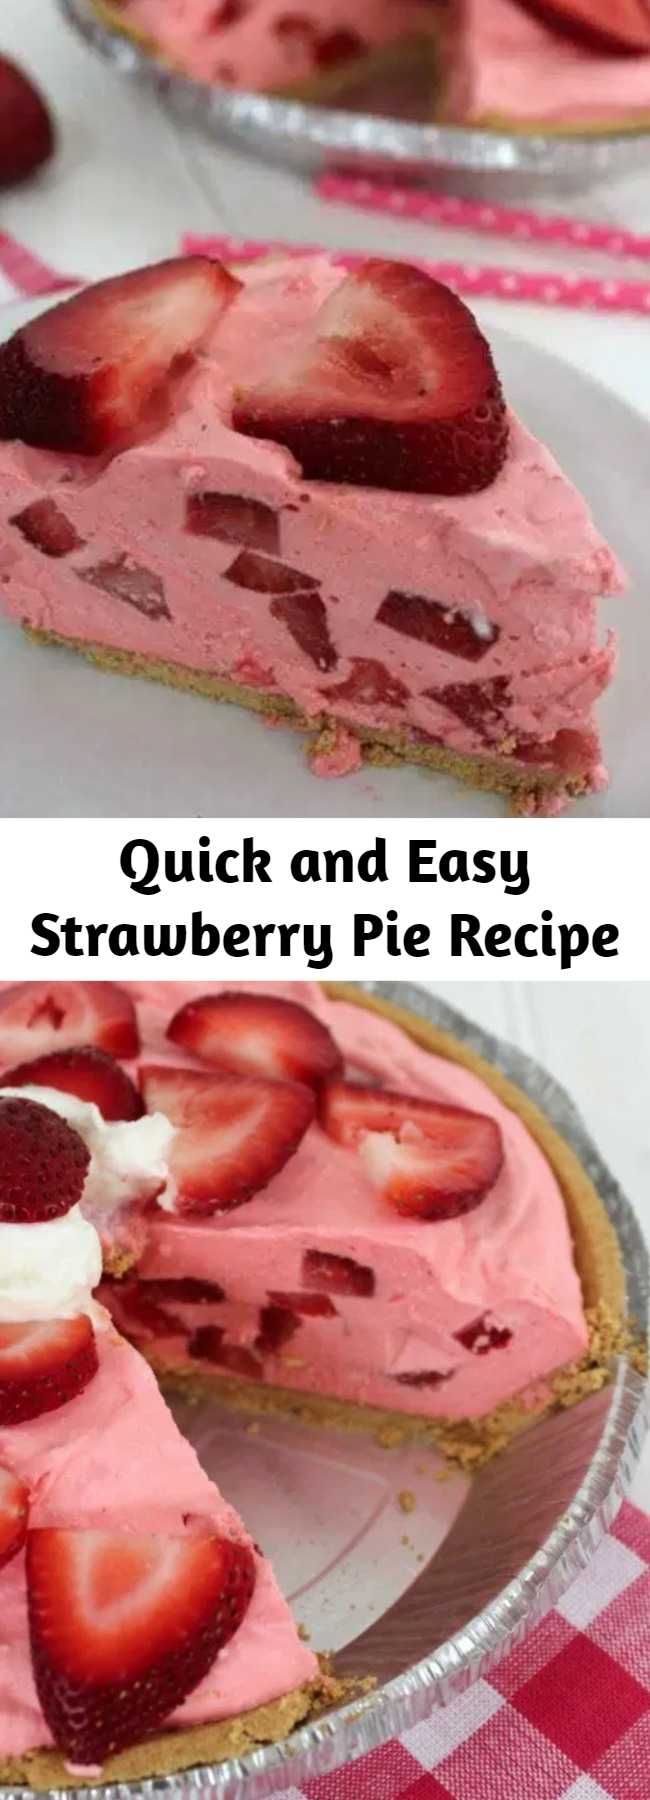 Quick and Easy Strawberry Pie Recipe - Super Simple and comes together quickly. Makes for a great summer BBQ dessert.